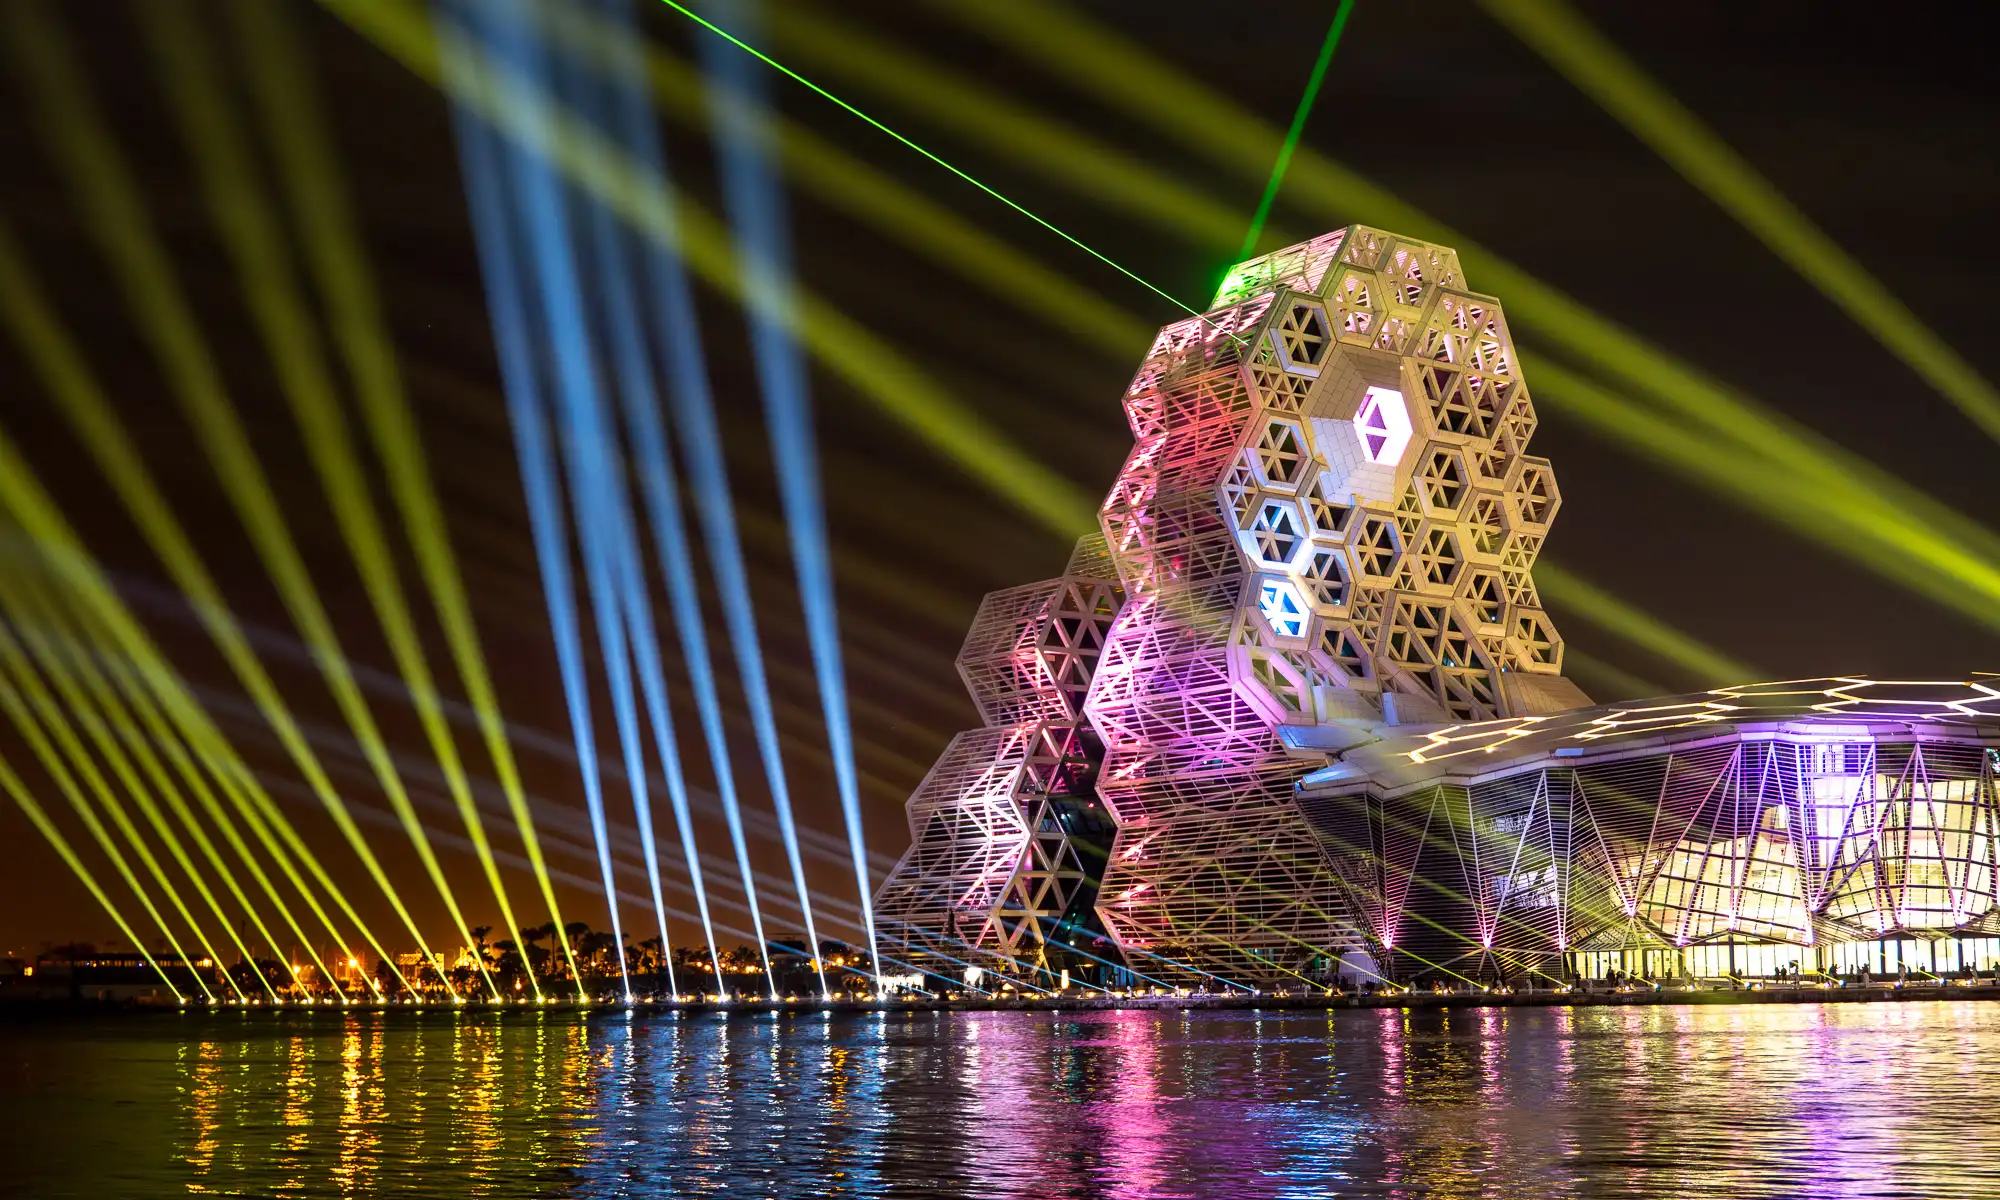 High-powered lights and lasers illuminate the sky around Kaohsiung Music Center during a spectacular light show.